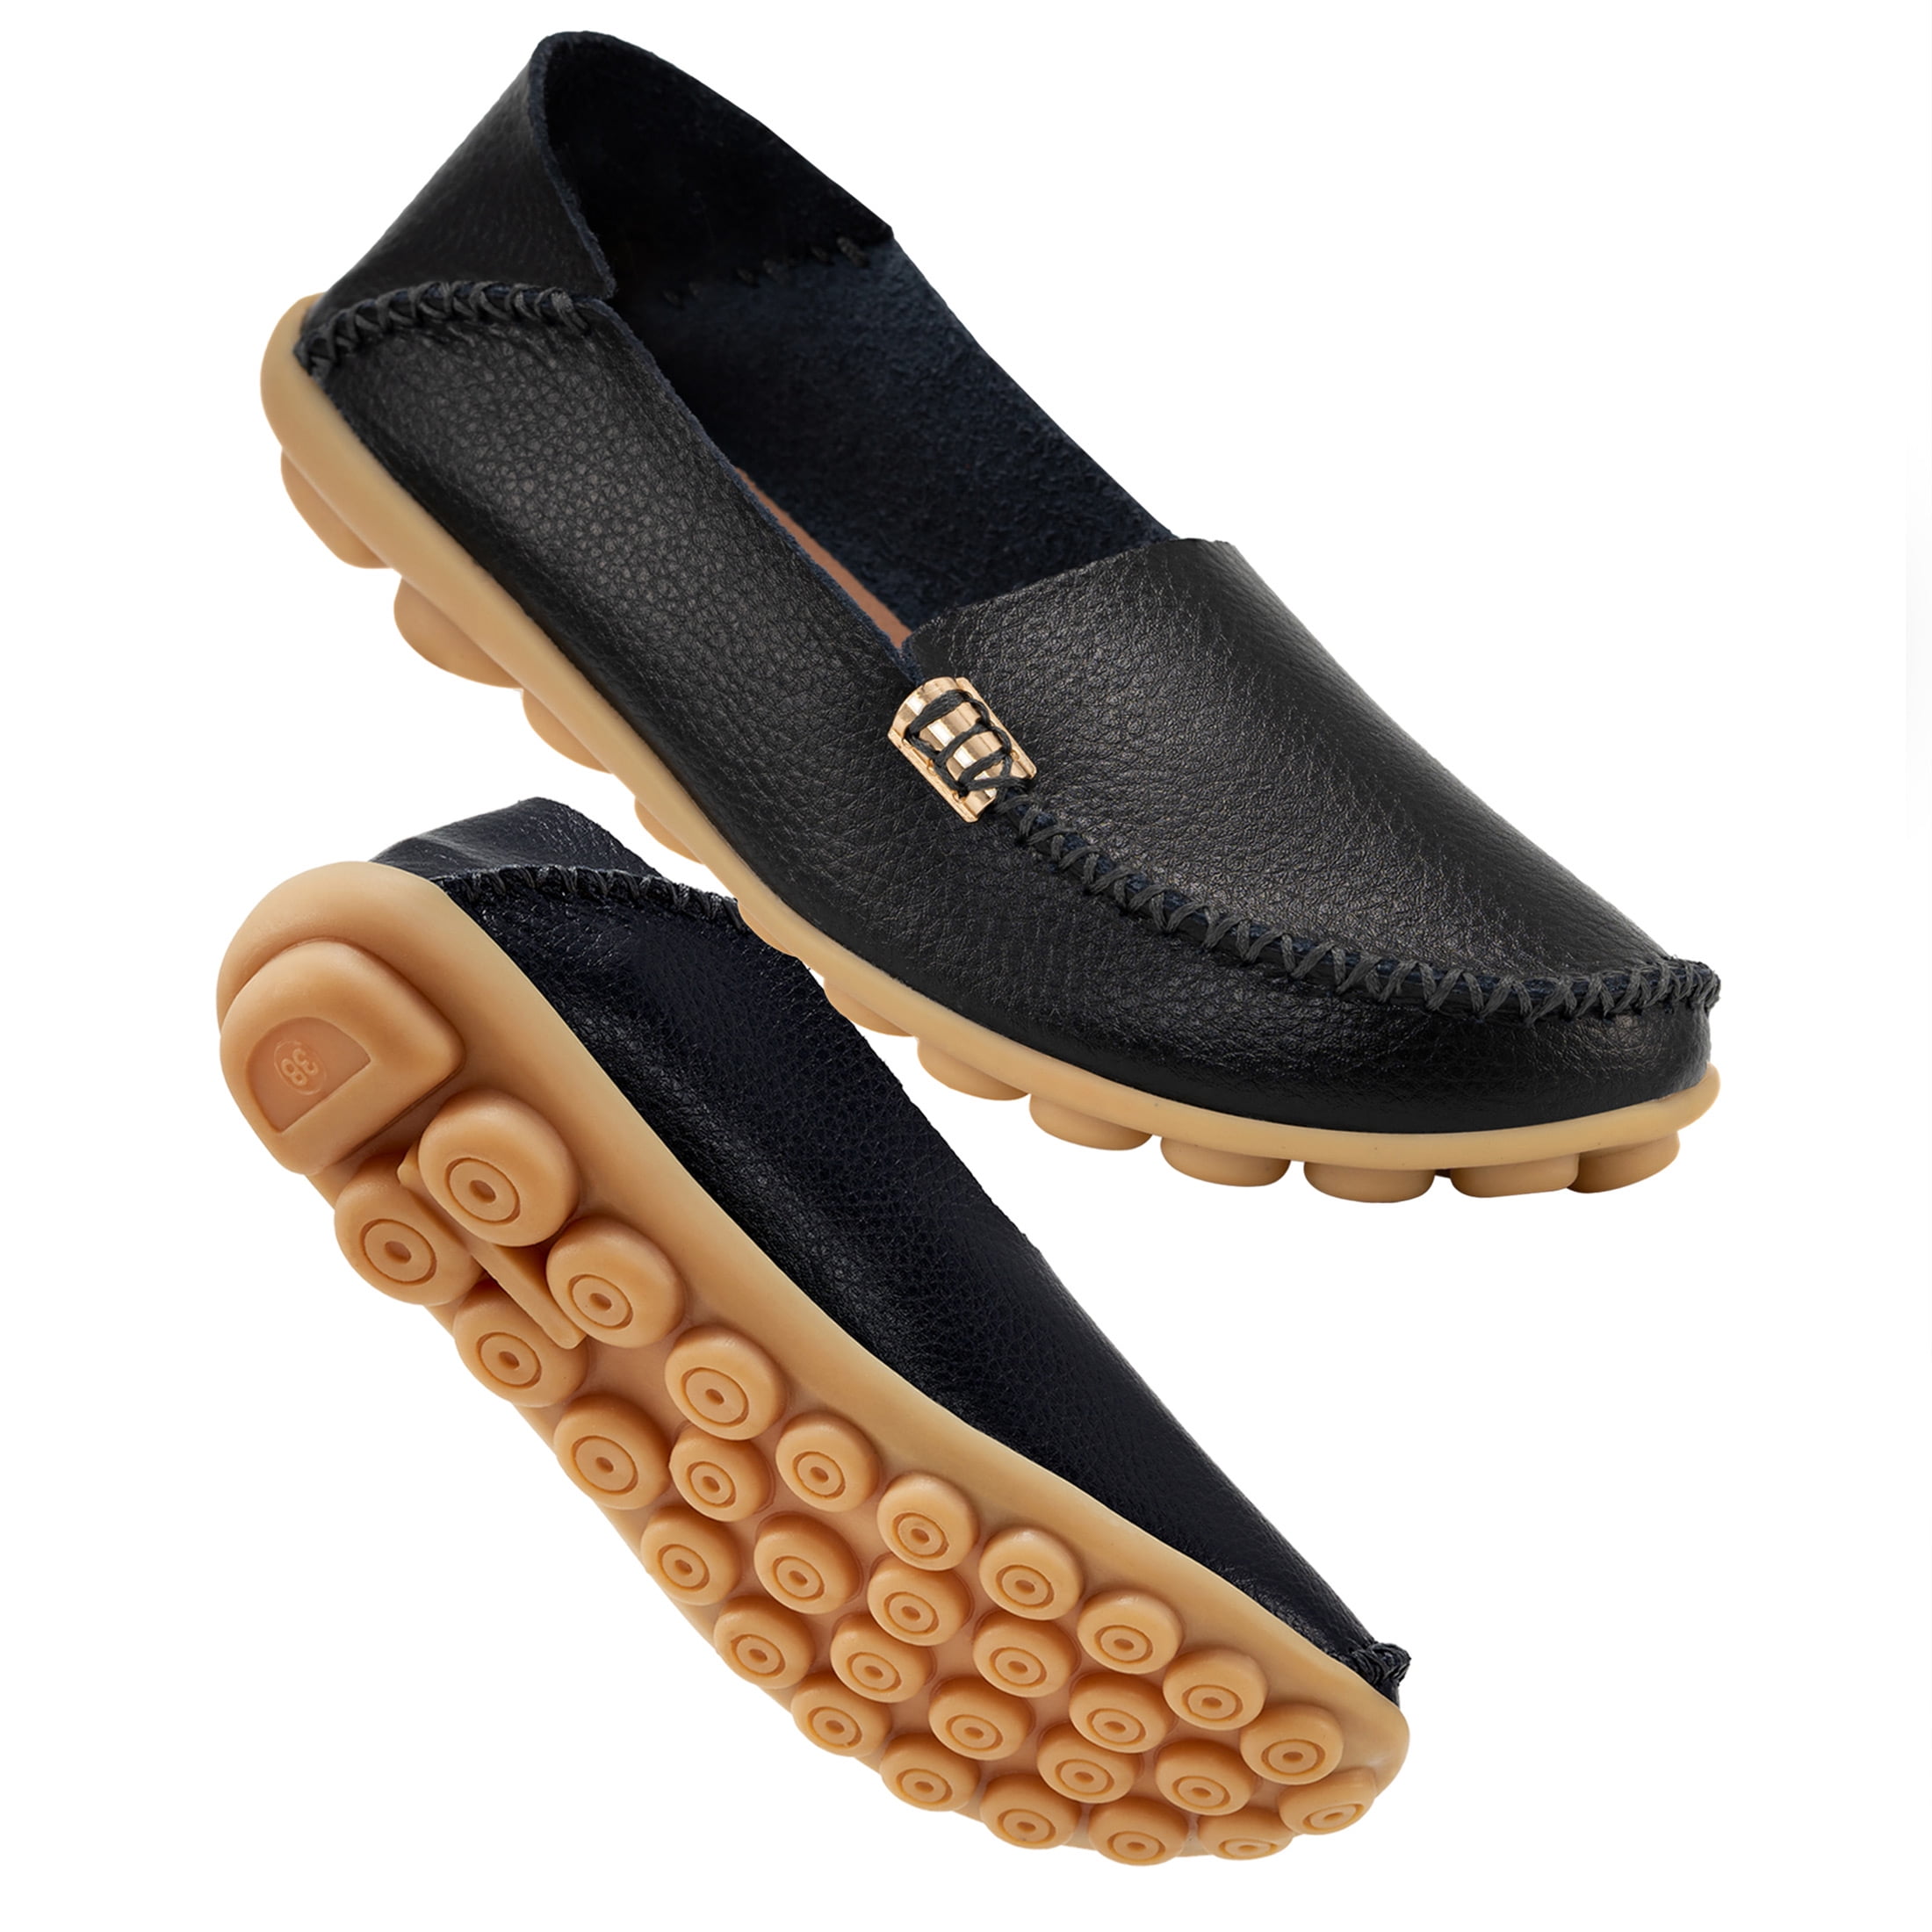 Comfort & Fashion Flats with Anti-skid Loafer Size 5-11 Woman Moccasin Shoes 